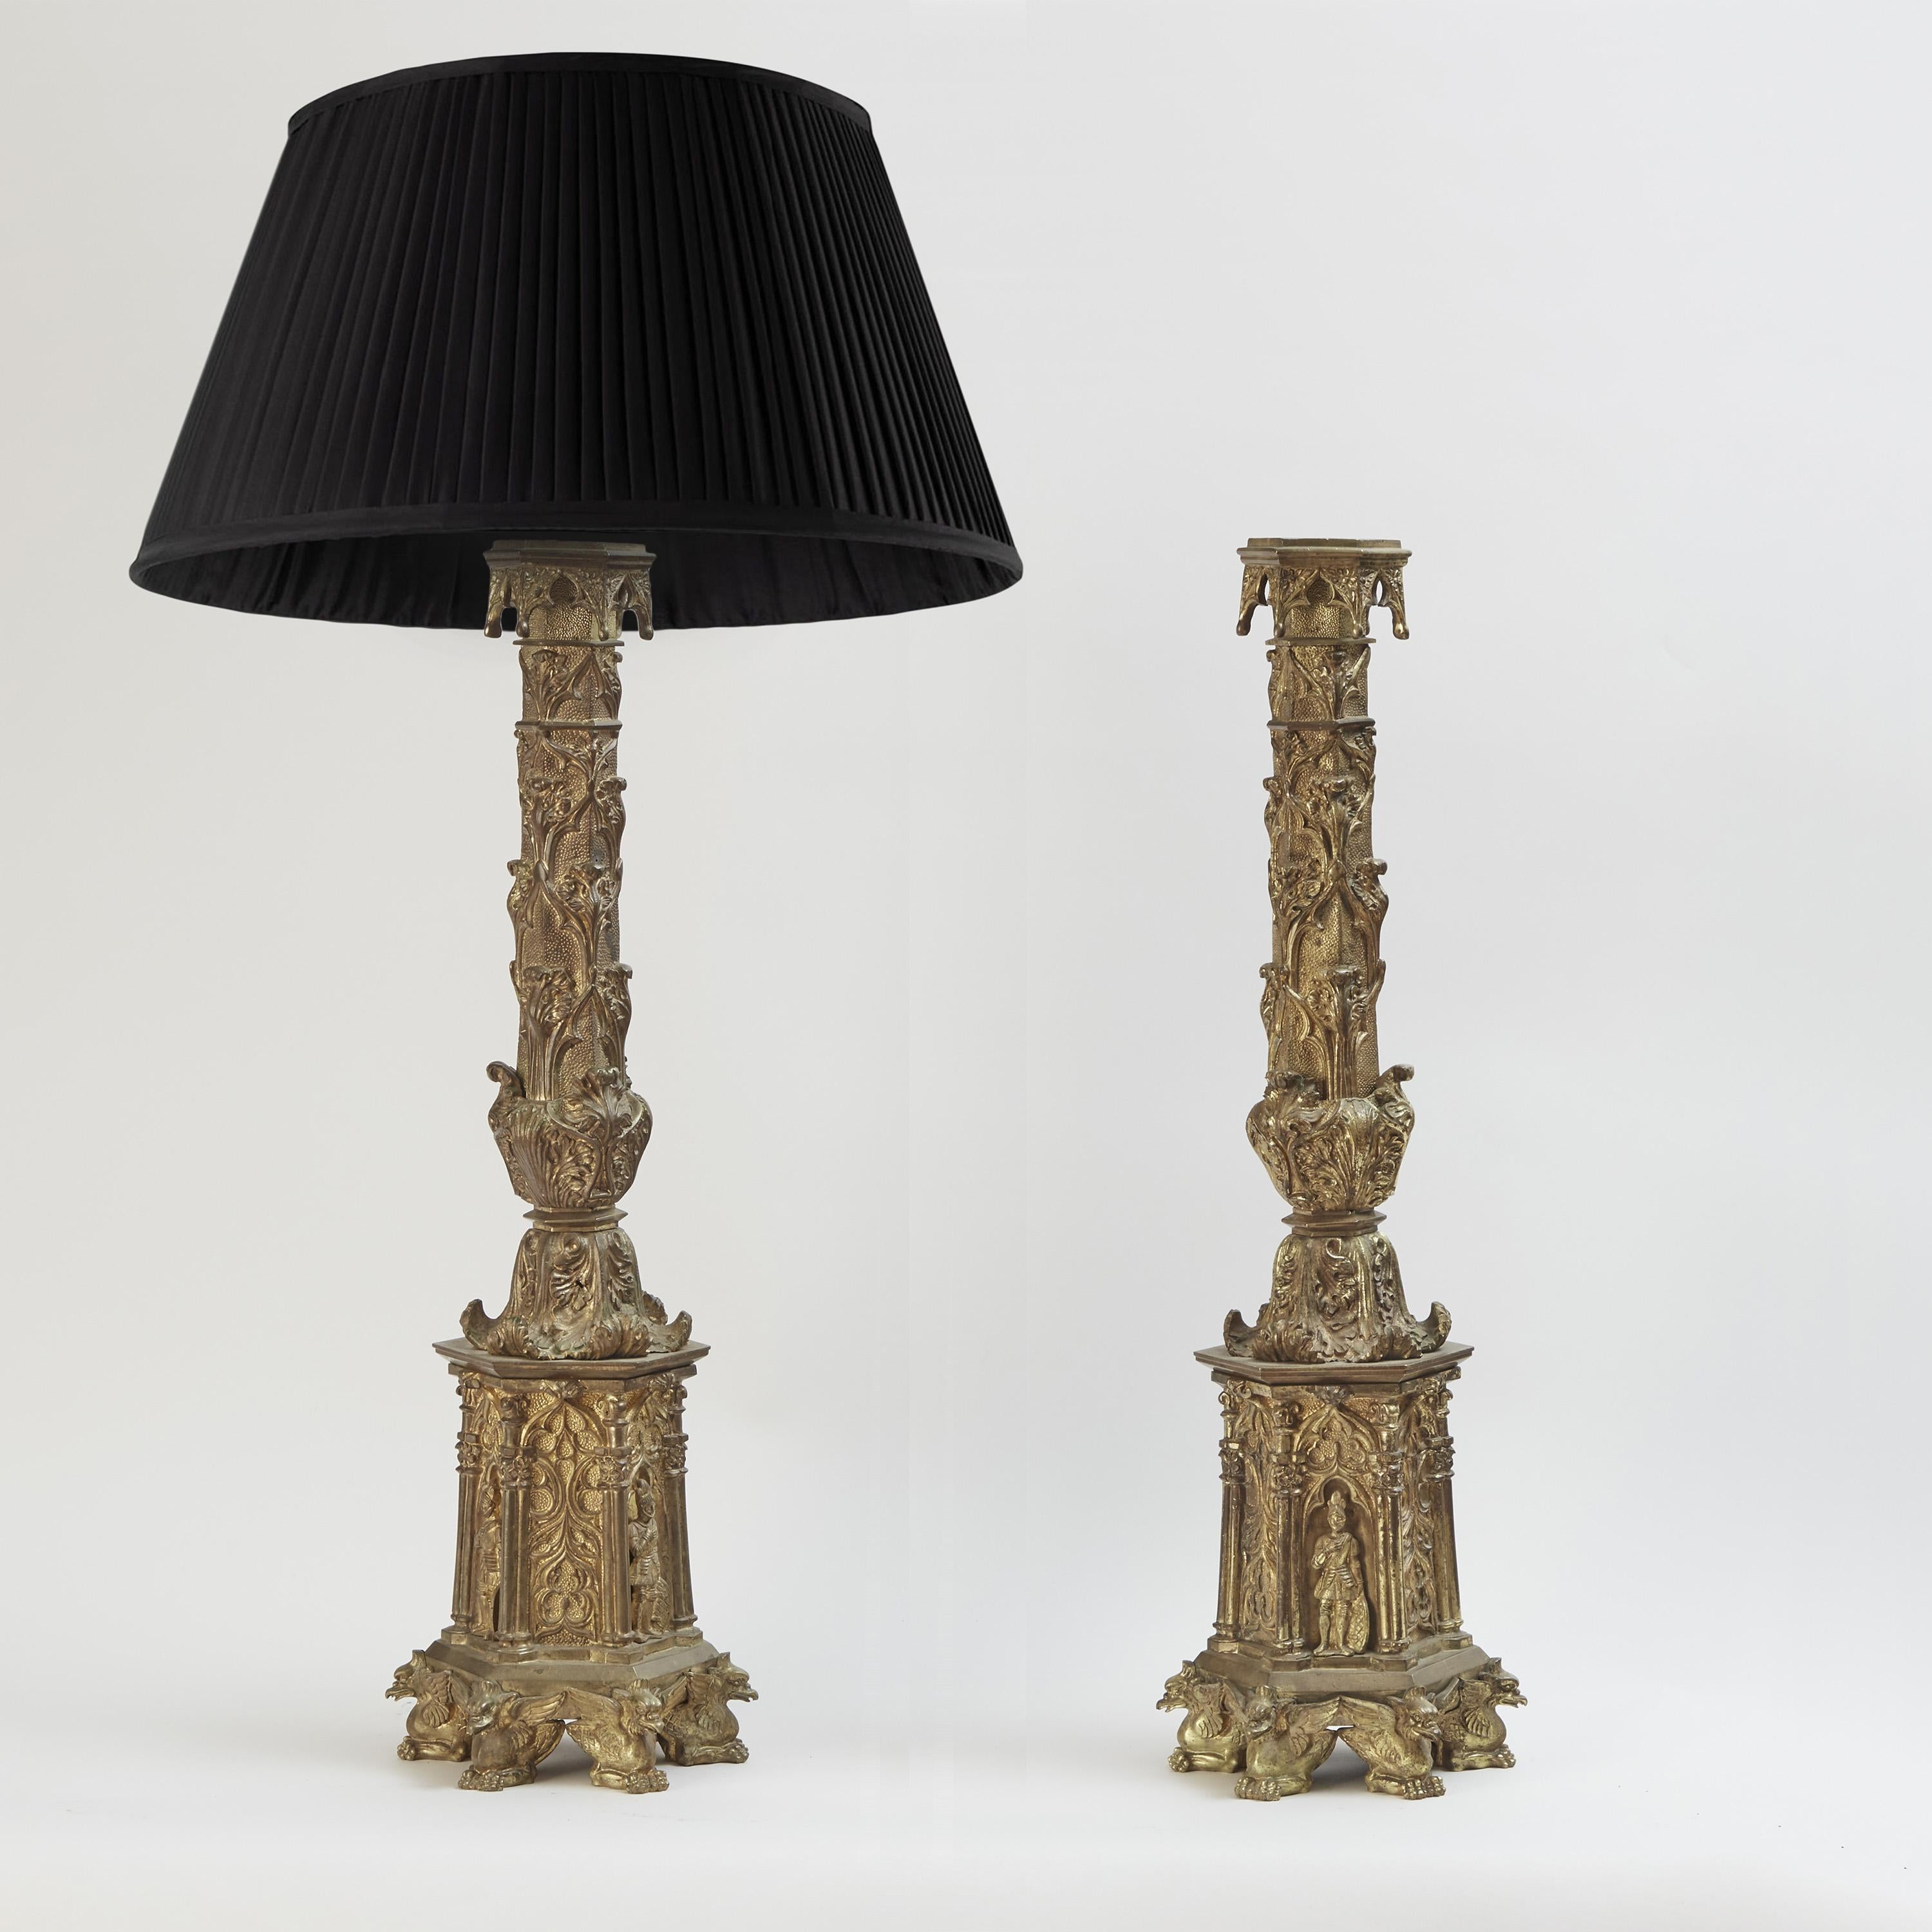 Gothic Revival Pair of Bronze Dore Candlestick Lamps in Gothic Taste